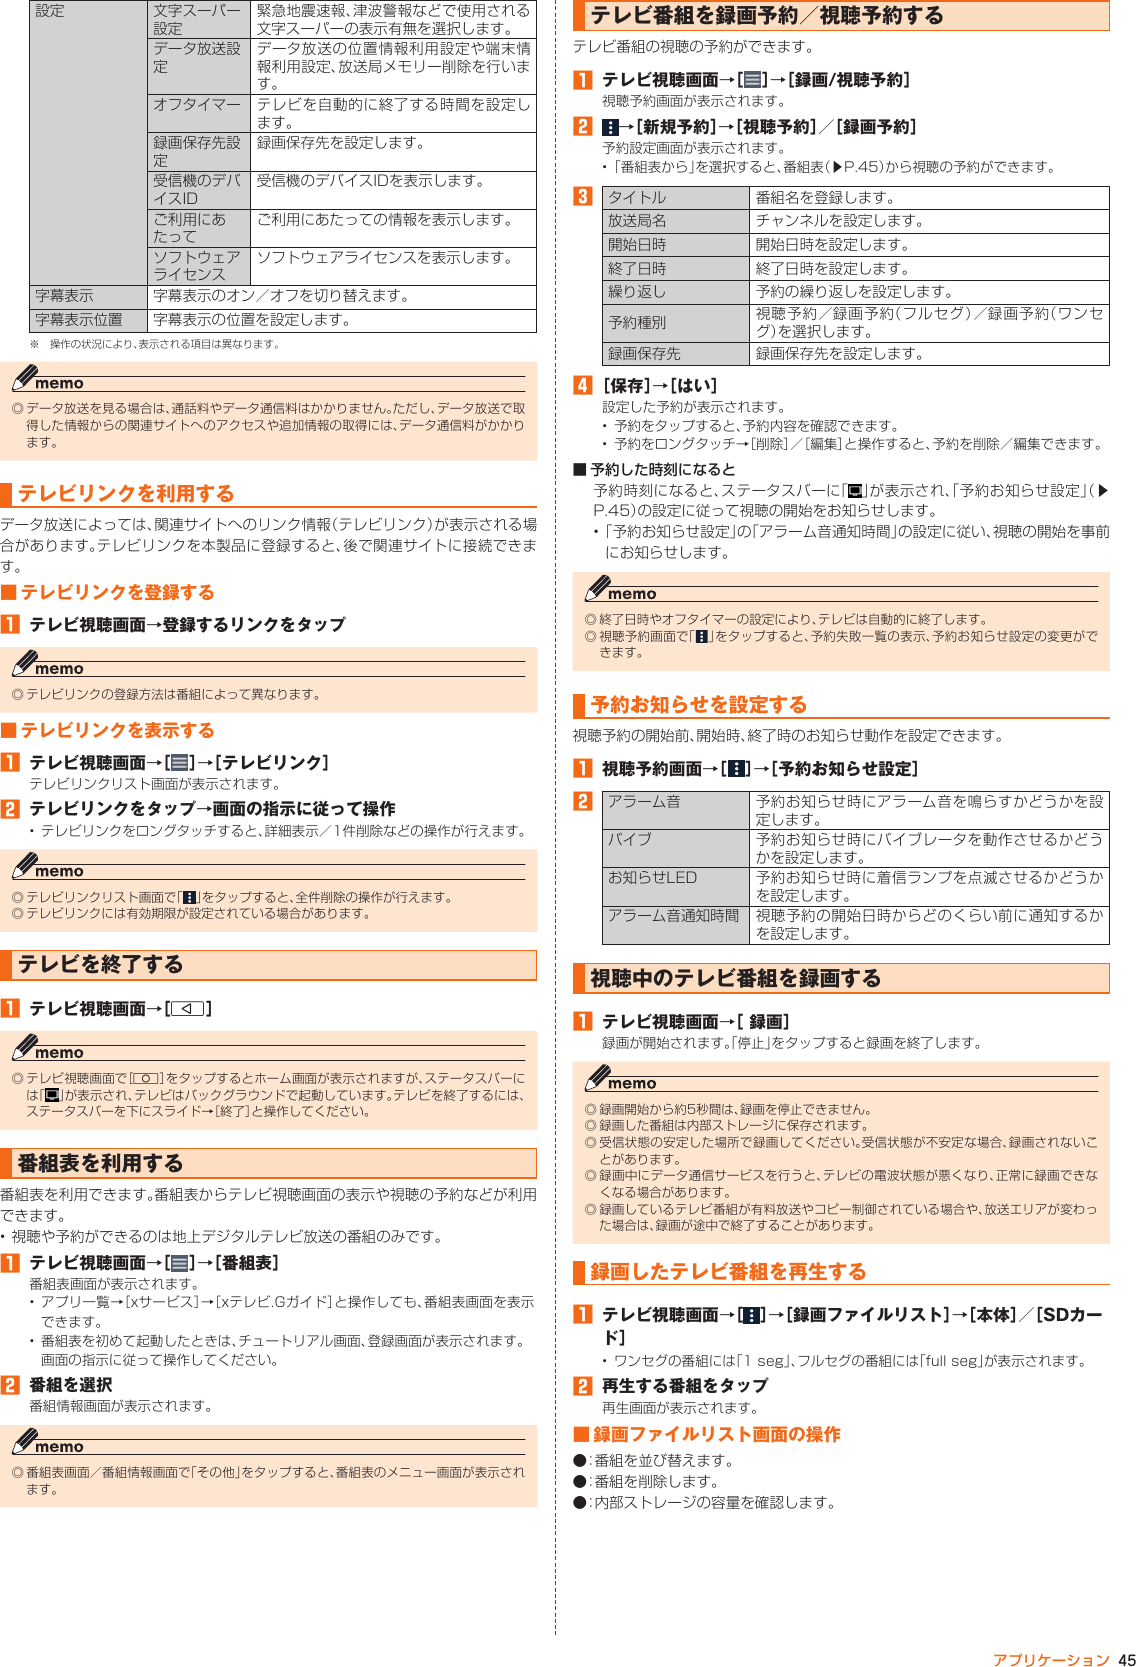 Page 46 of Kyocera FA85 Tablet User Manual 2